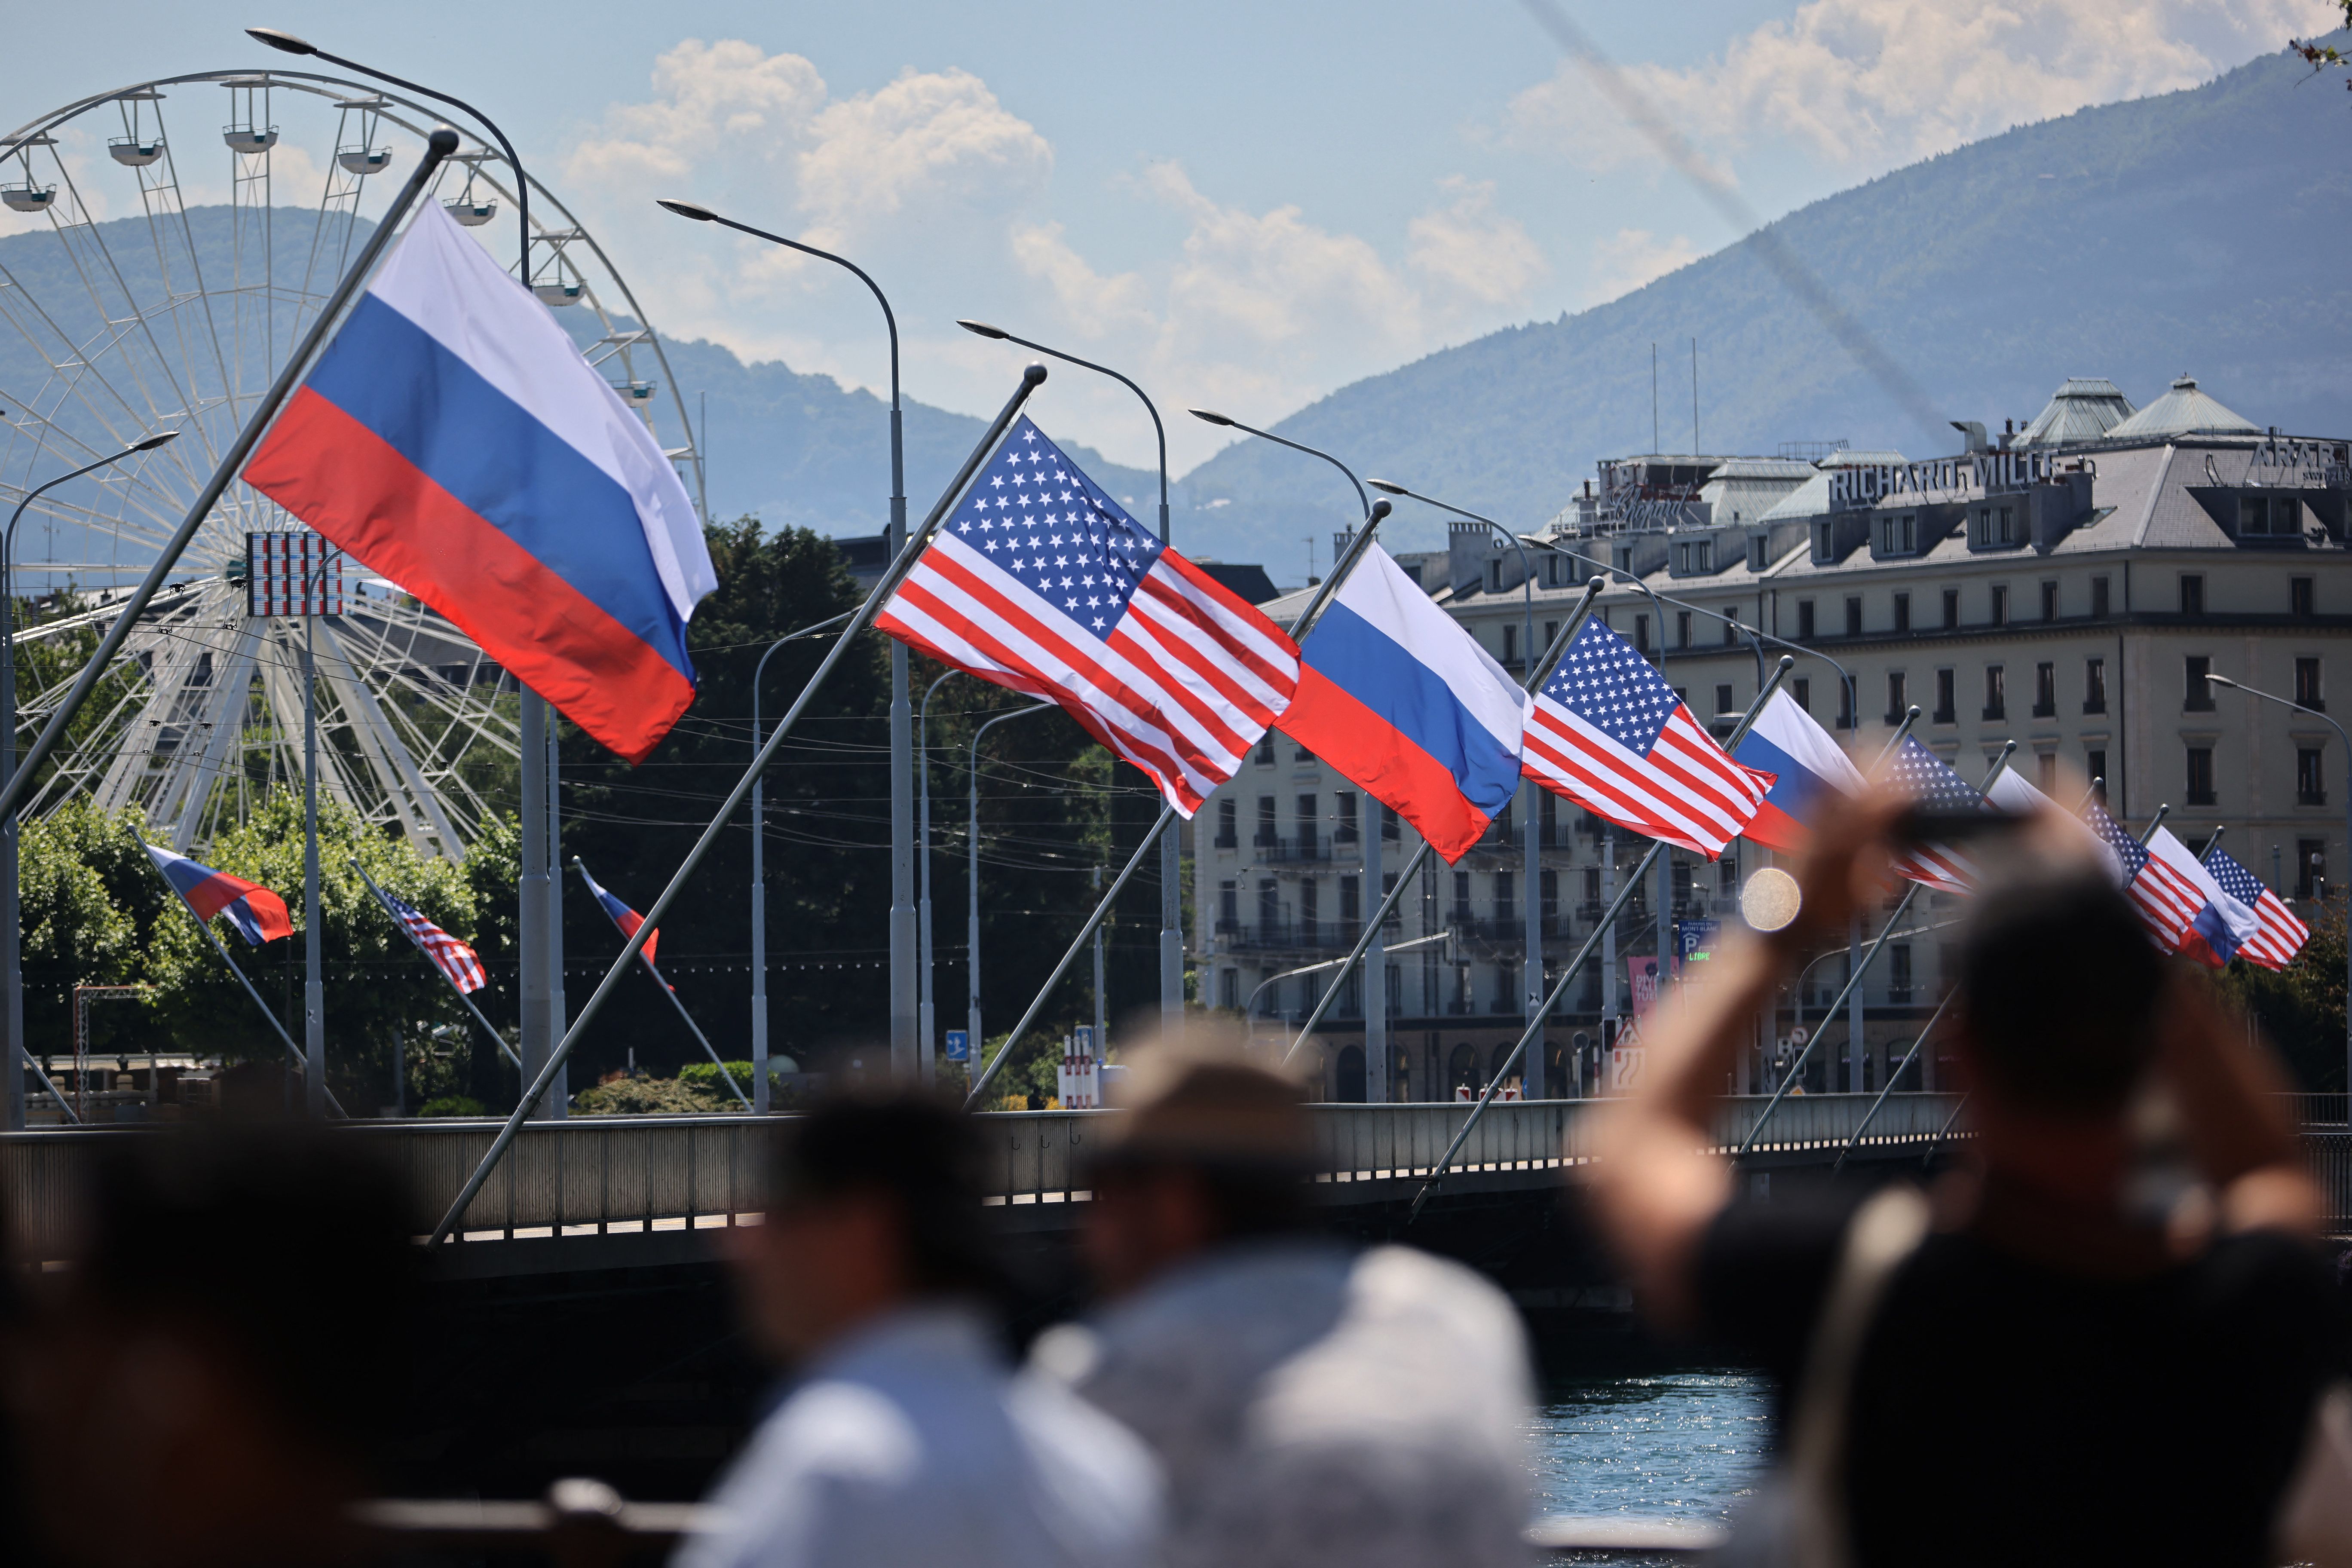 U.S. and Russia flags